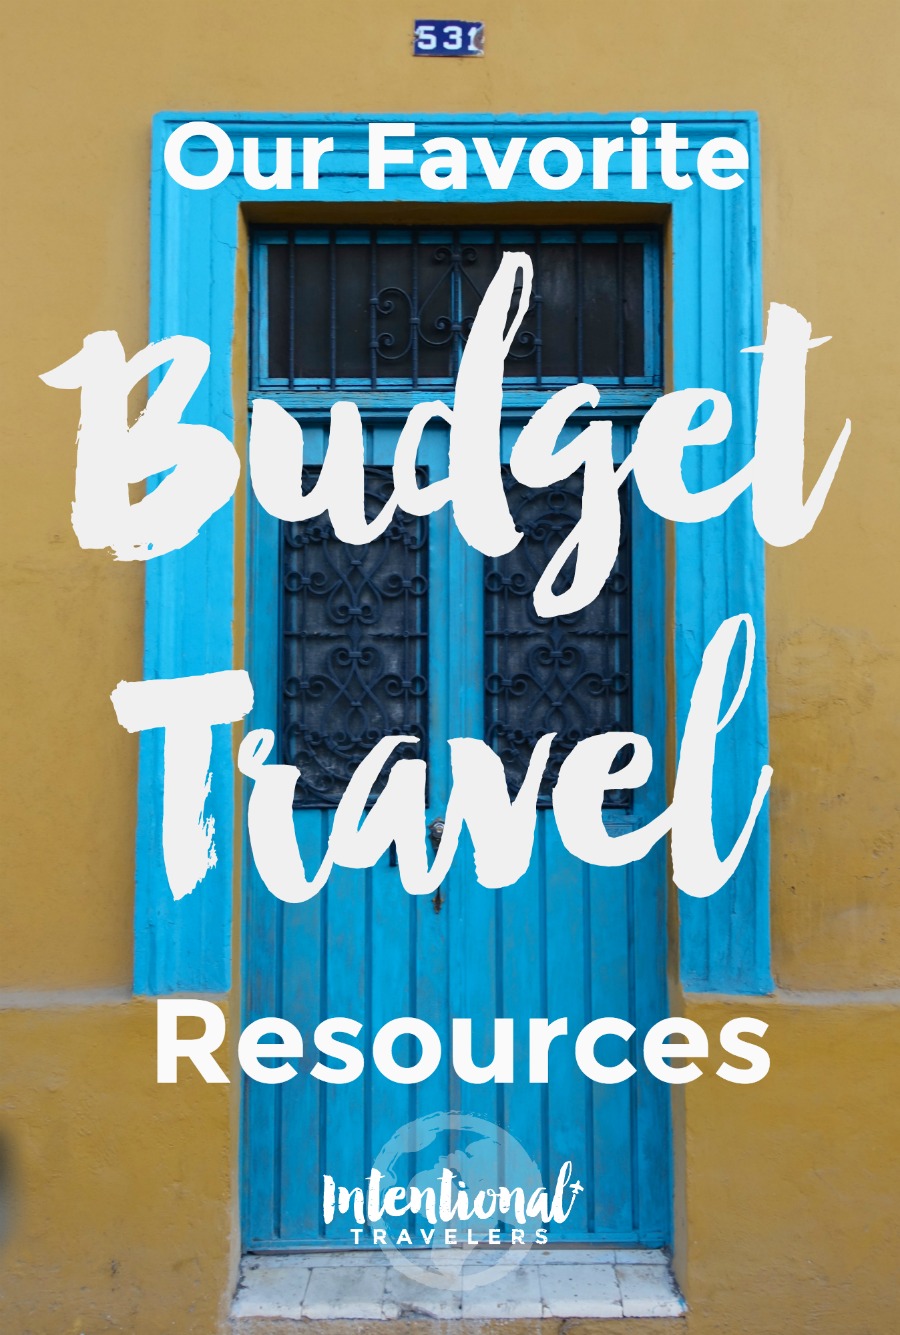 Budget travel websites and tools we love - sign up for even more in depth tips on budget accommodations, flights, tours, etc. with our free Intentional Travelers e-mail series